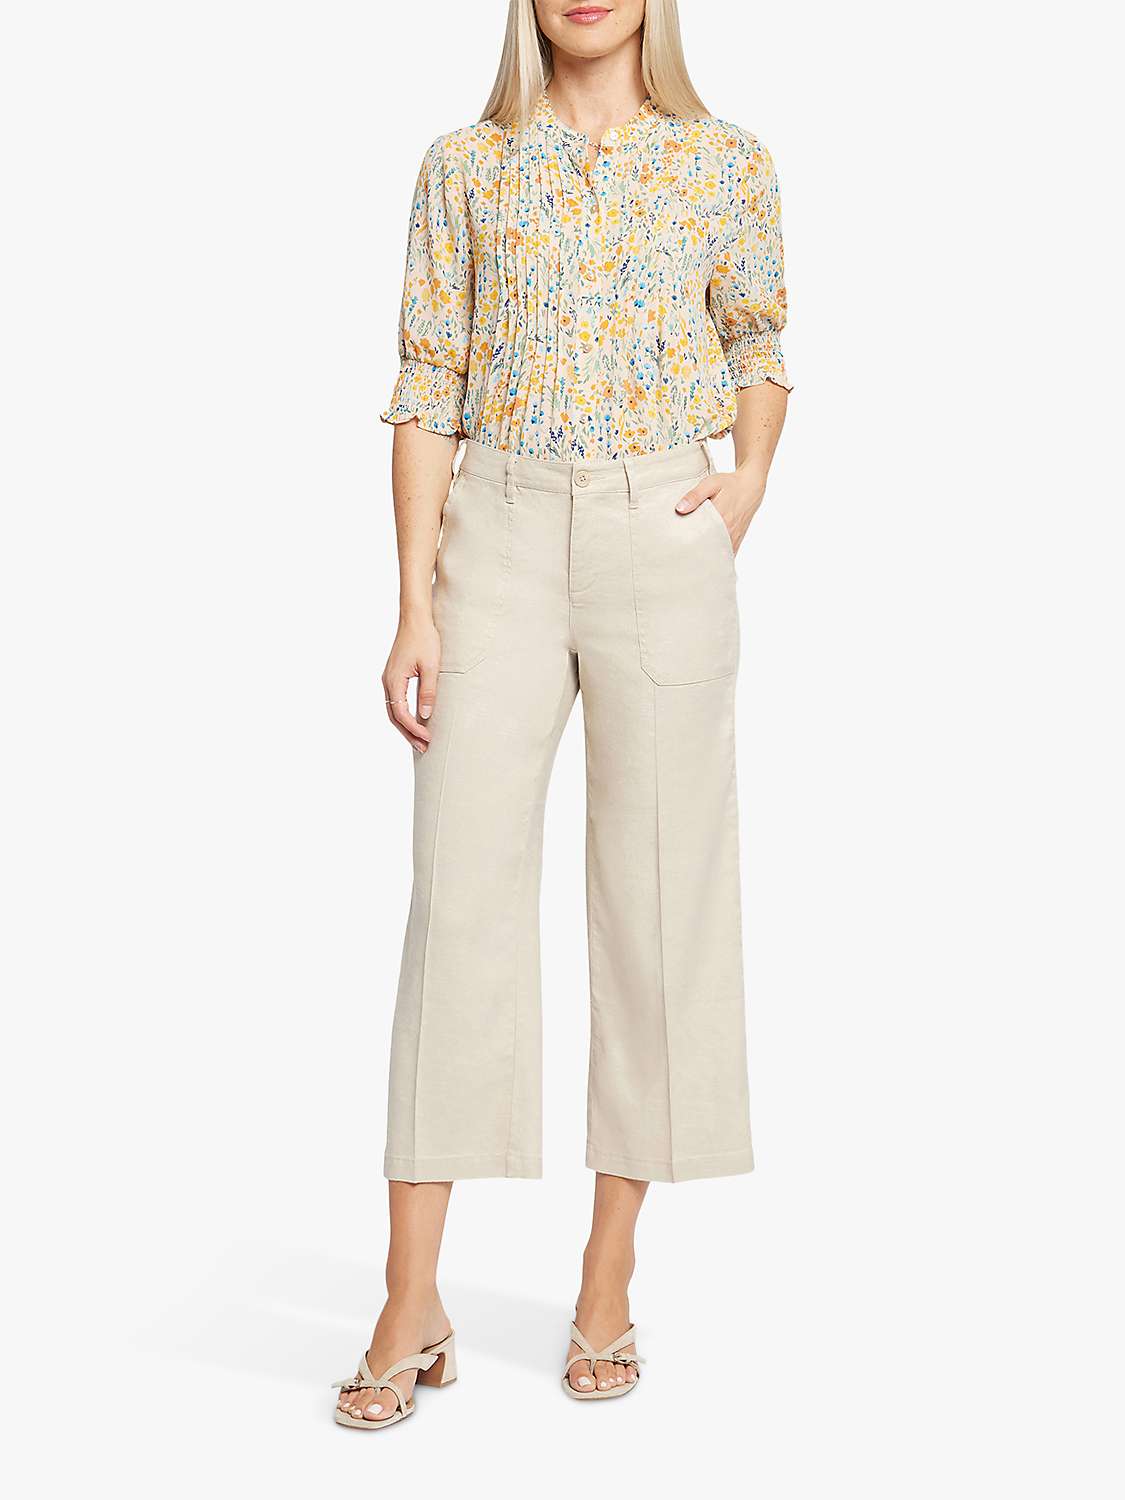 Buy NYDJ Wide Leg Stretch Linen Cargo Capri Trousers, Feather Online at johnlewis.com